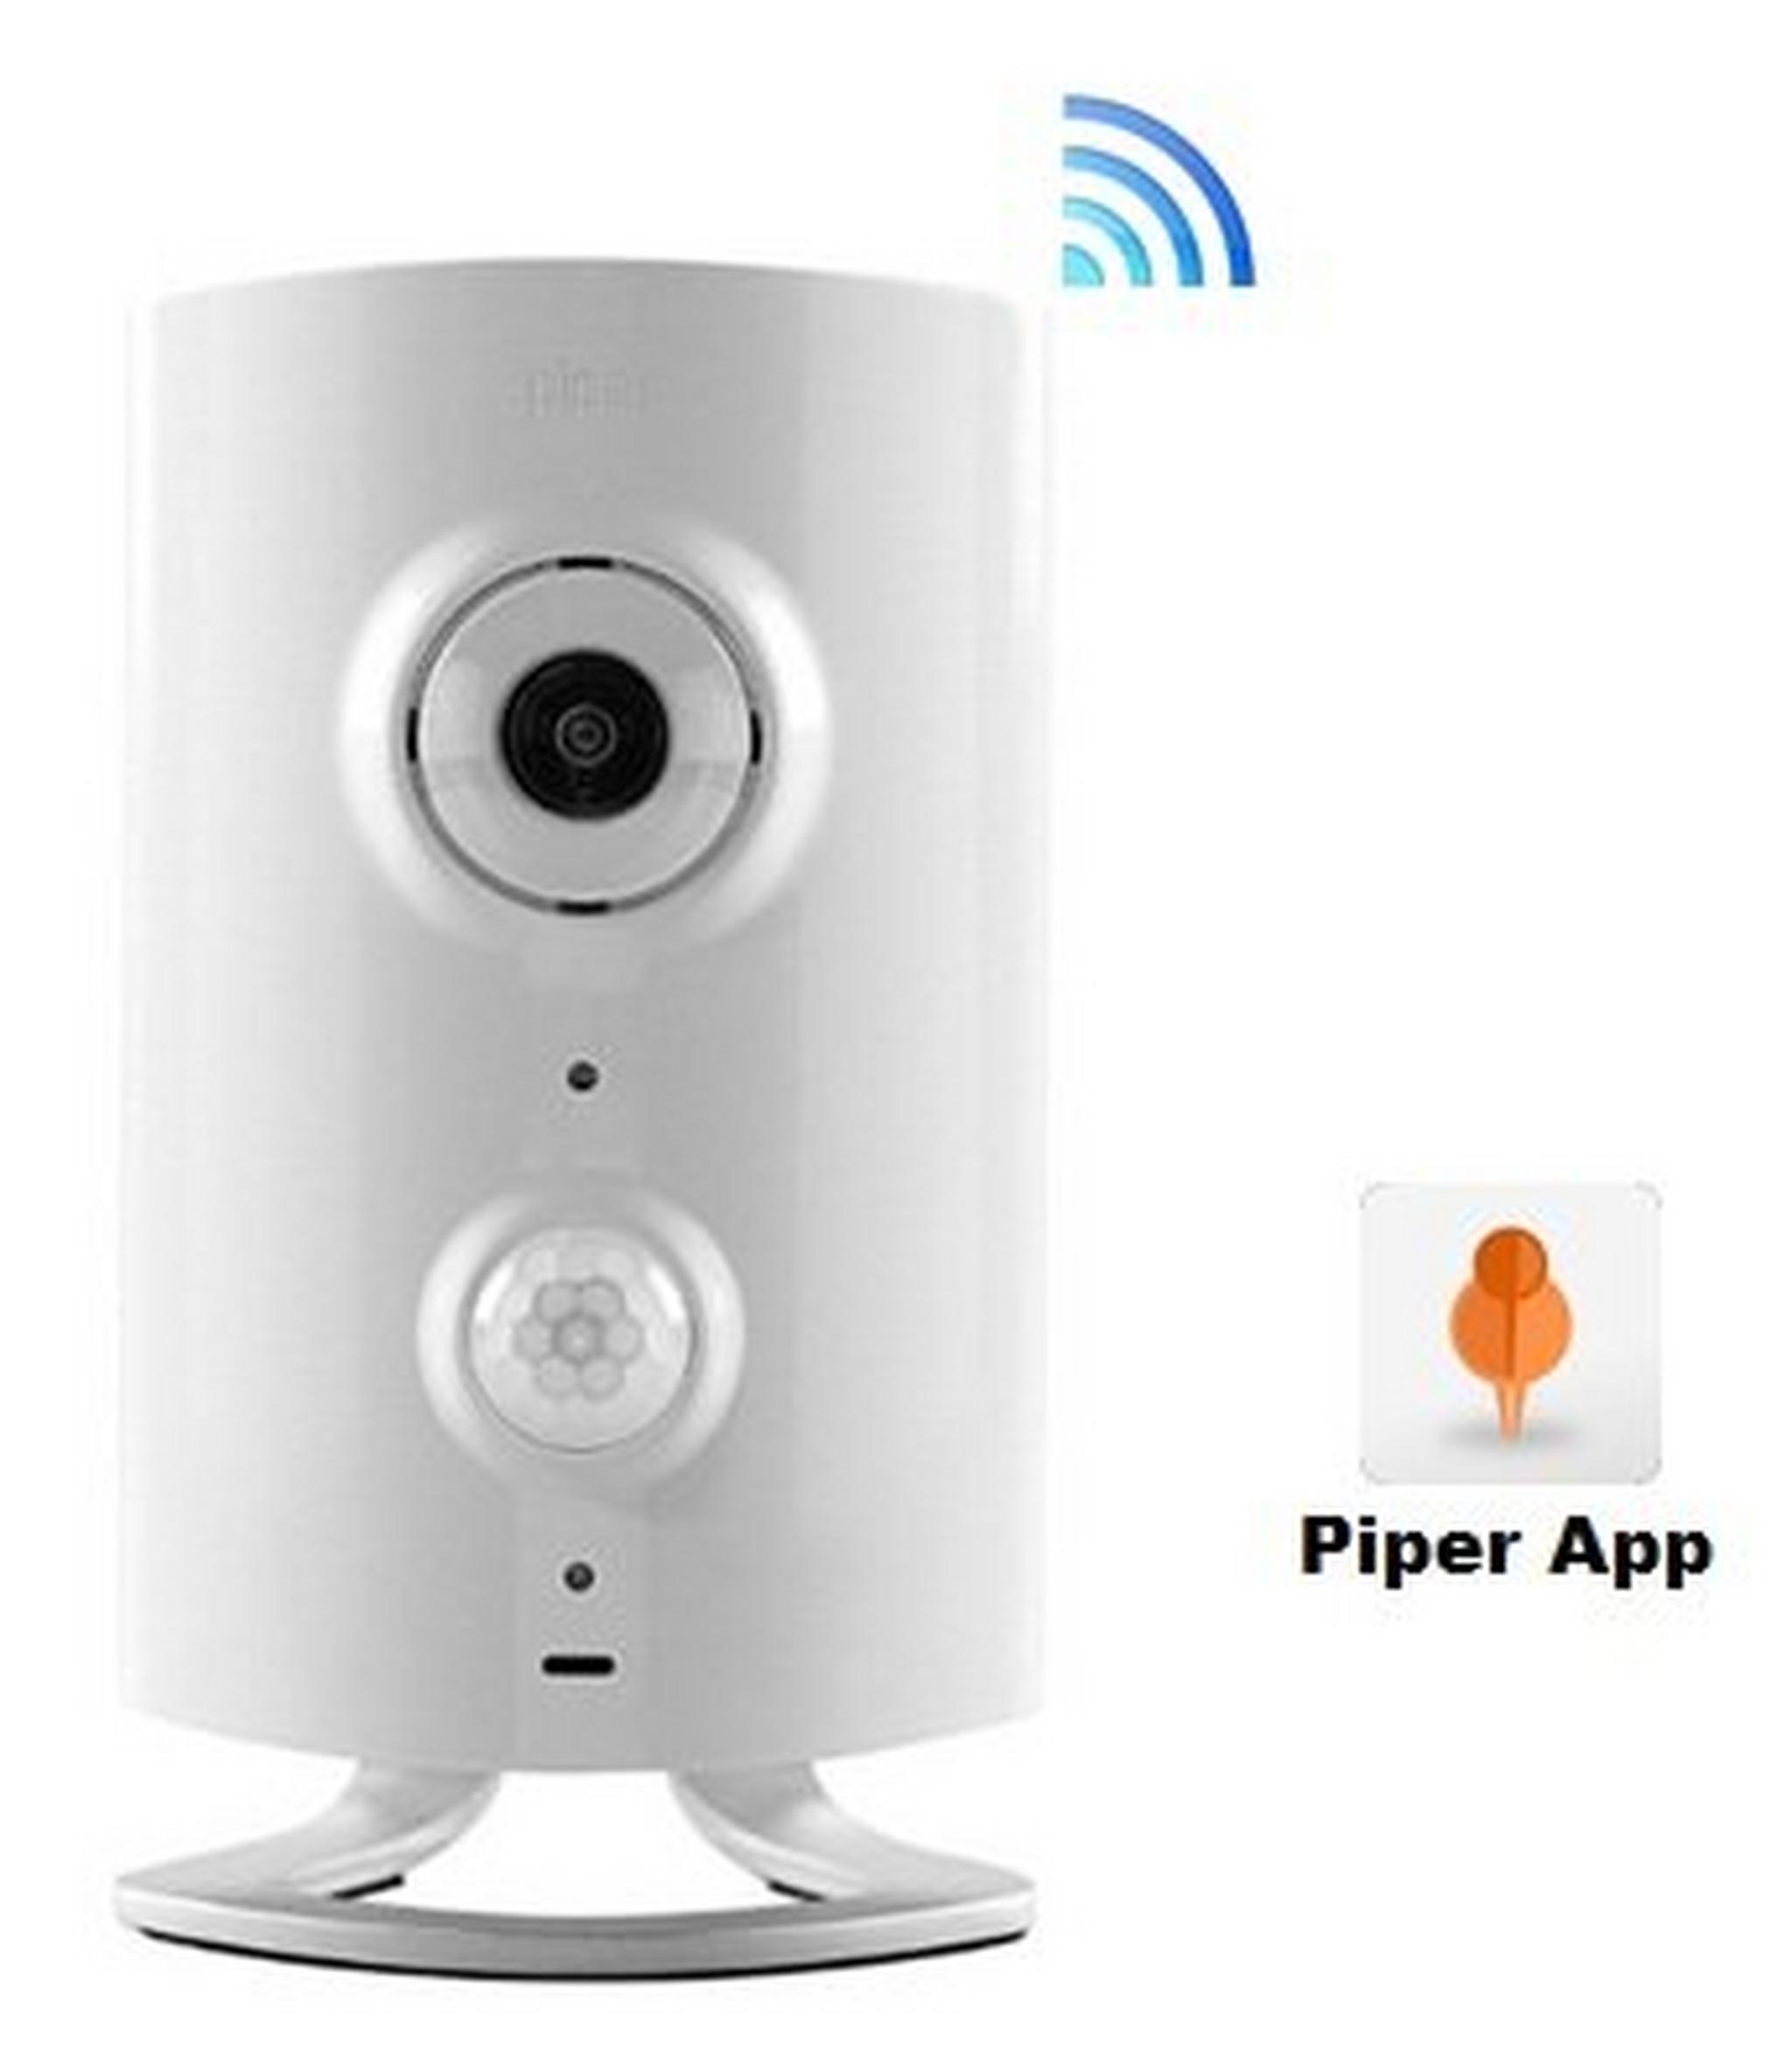 Piper classic - HD Security Camera Wireless Surveillance System (P1.0-NA-W)